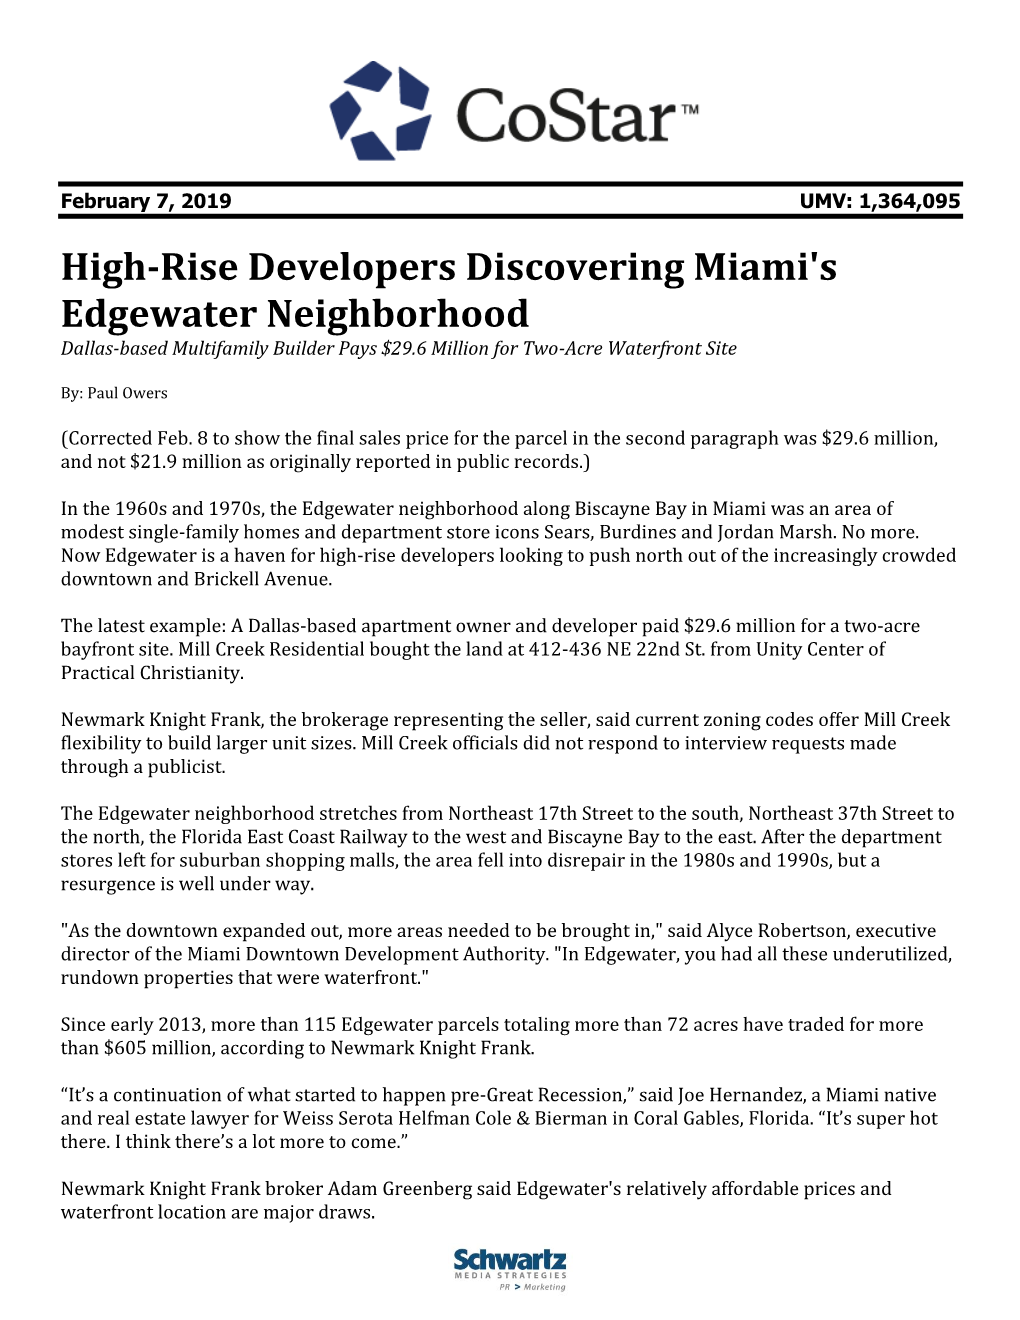 High-Rise Developers Discovering Miami's Edgewater Neighborhood Dallas-Based Multifamily Builder Pays $29.6 Million for Two-Acre Waterfront Site